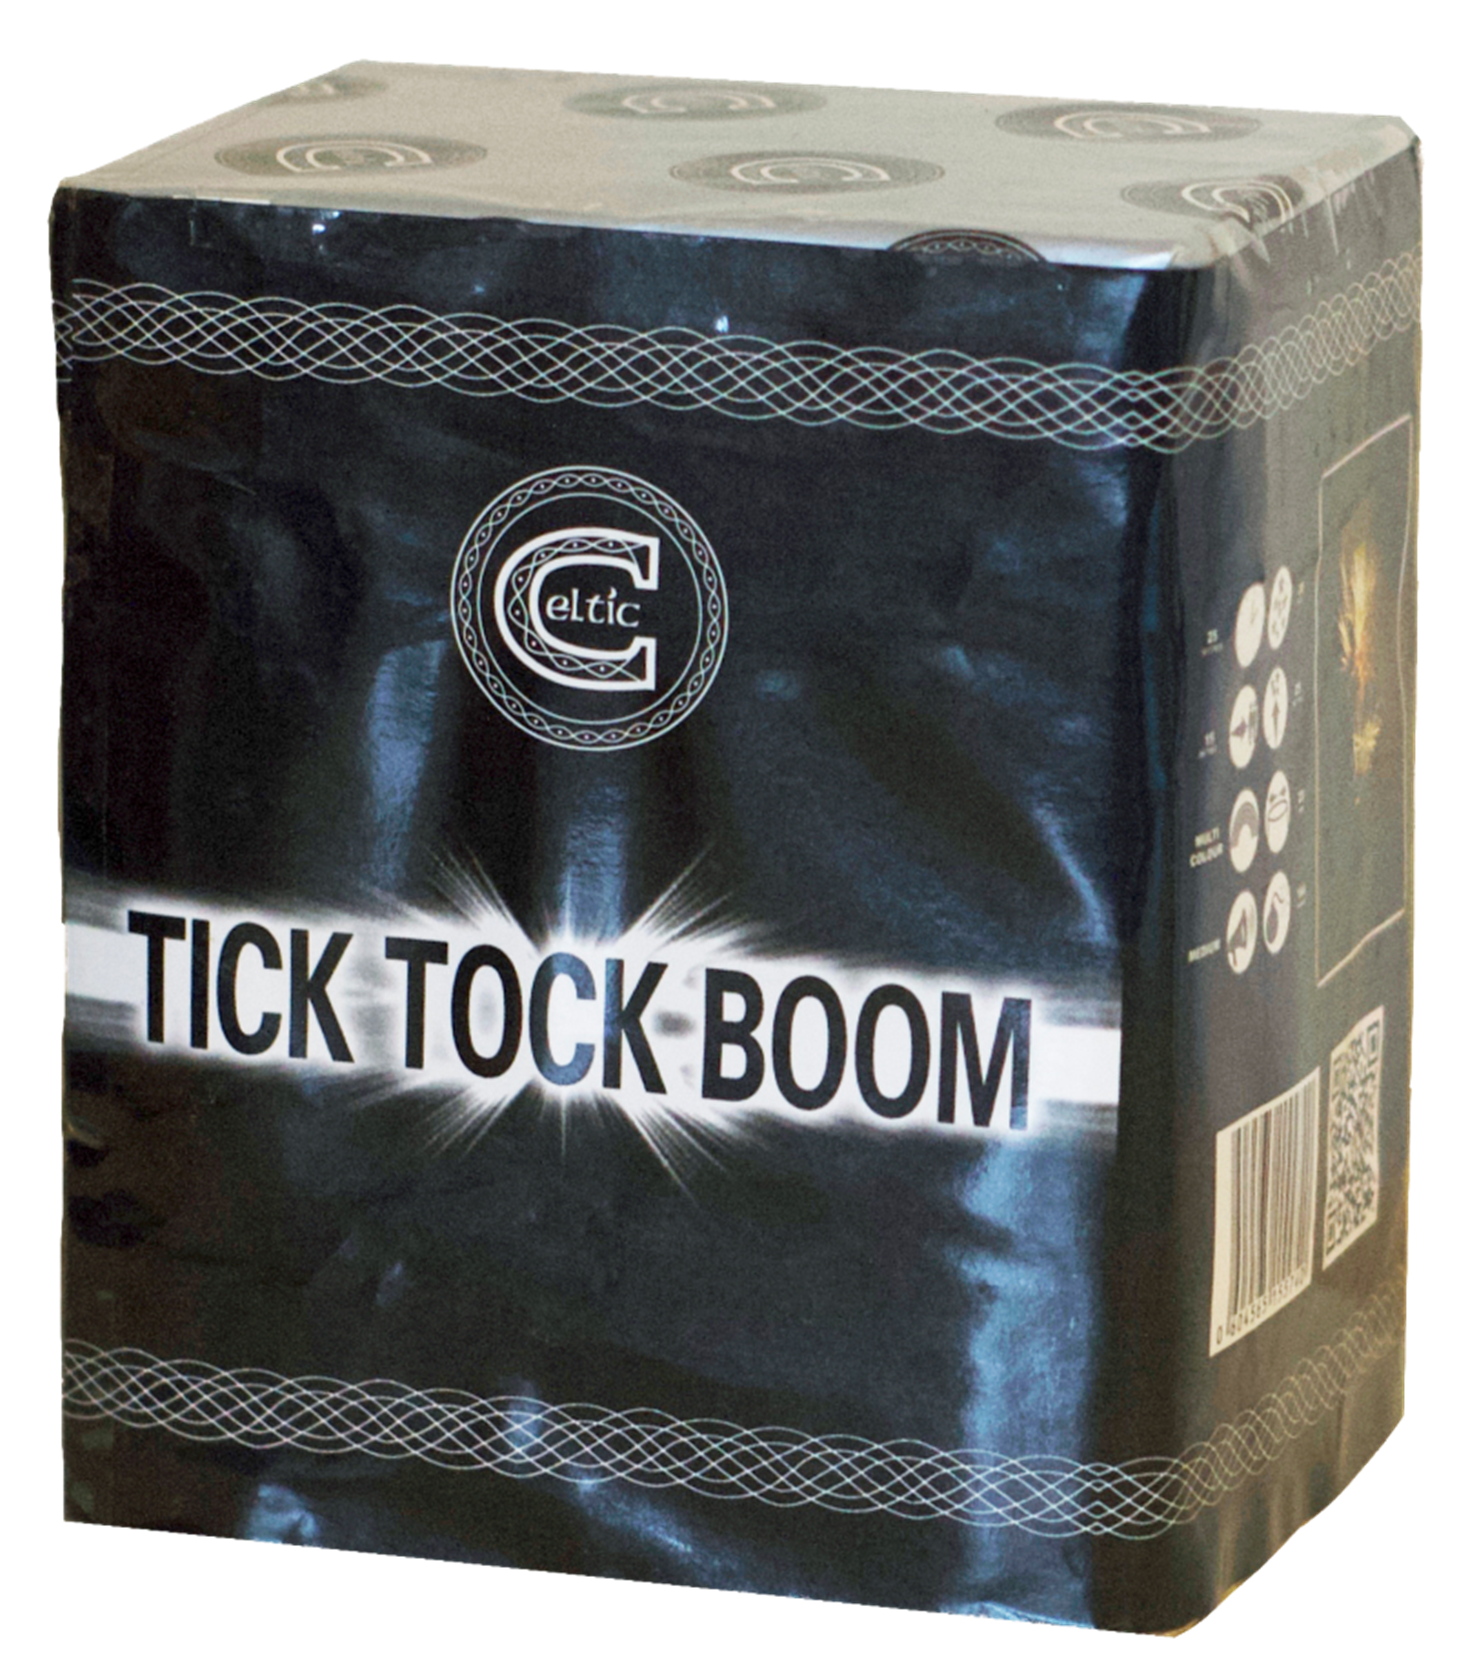 Tick Tock Boom by Celtic Fireworks